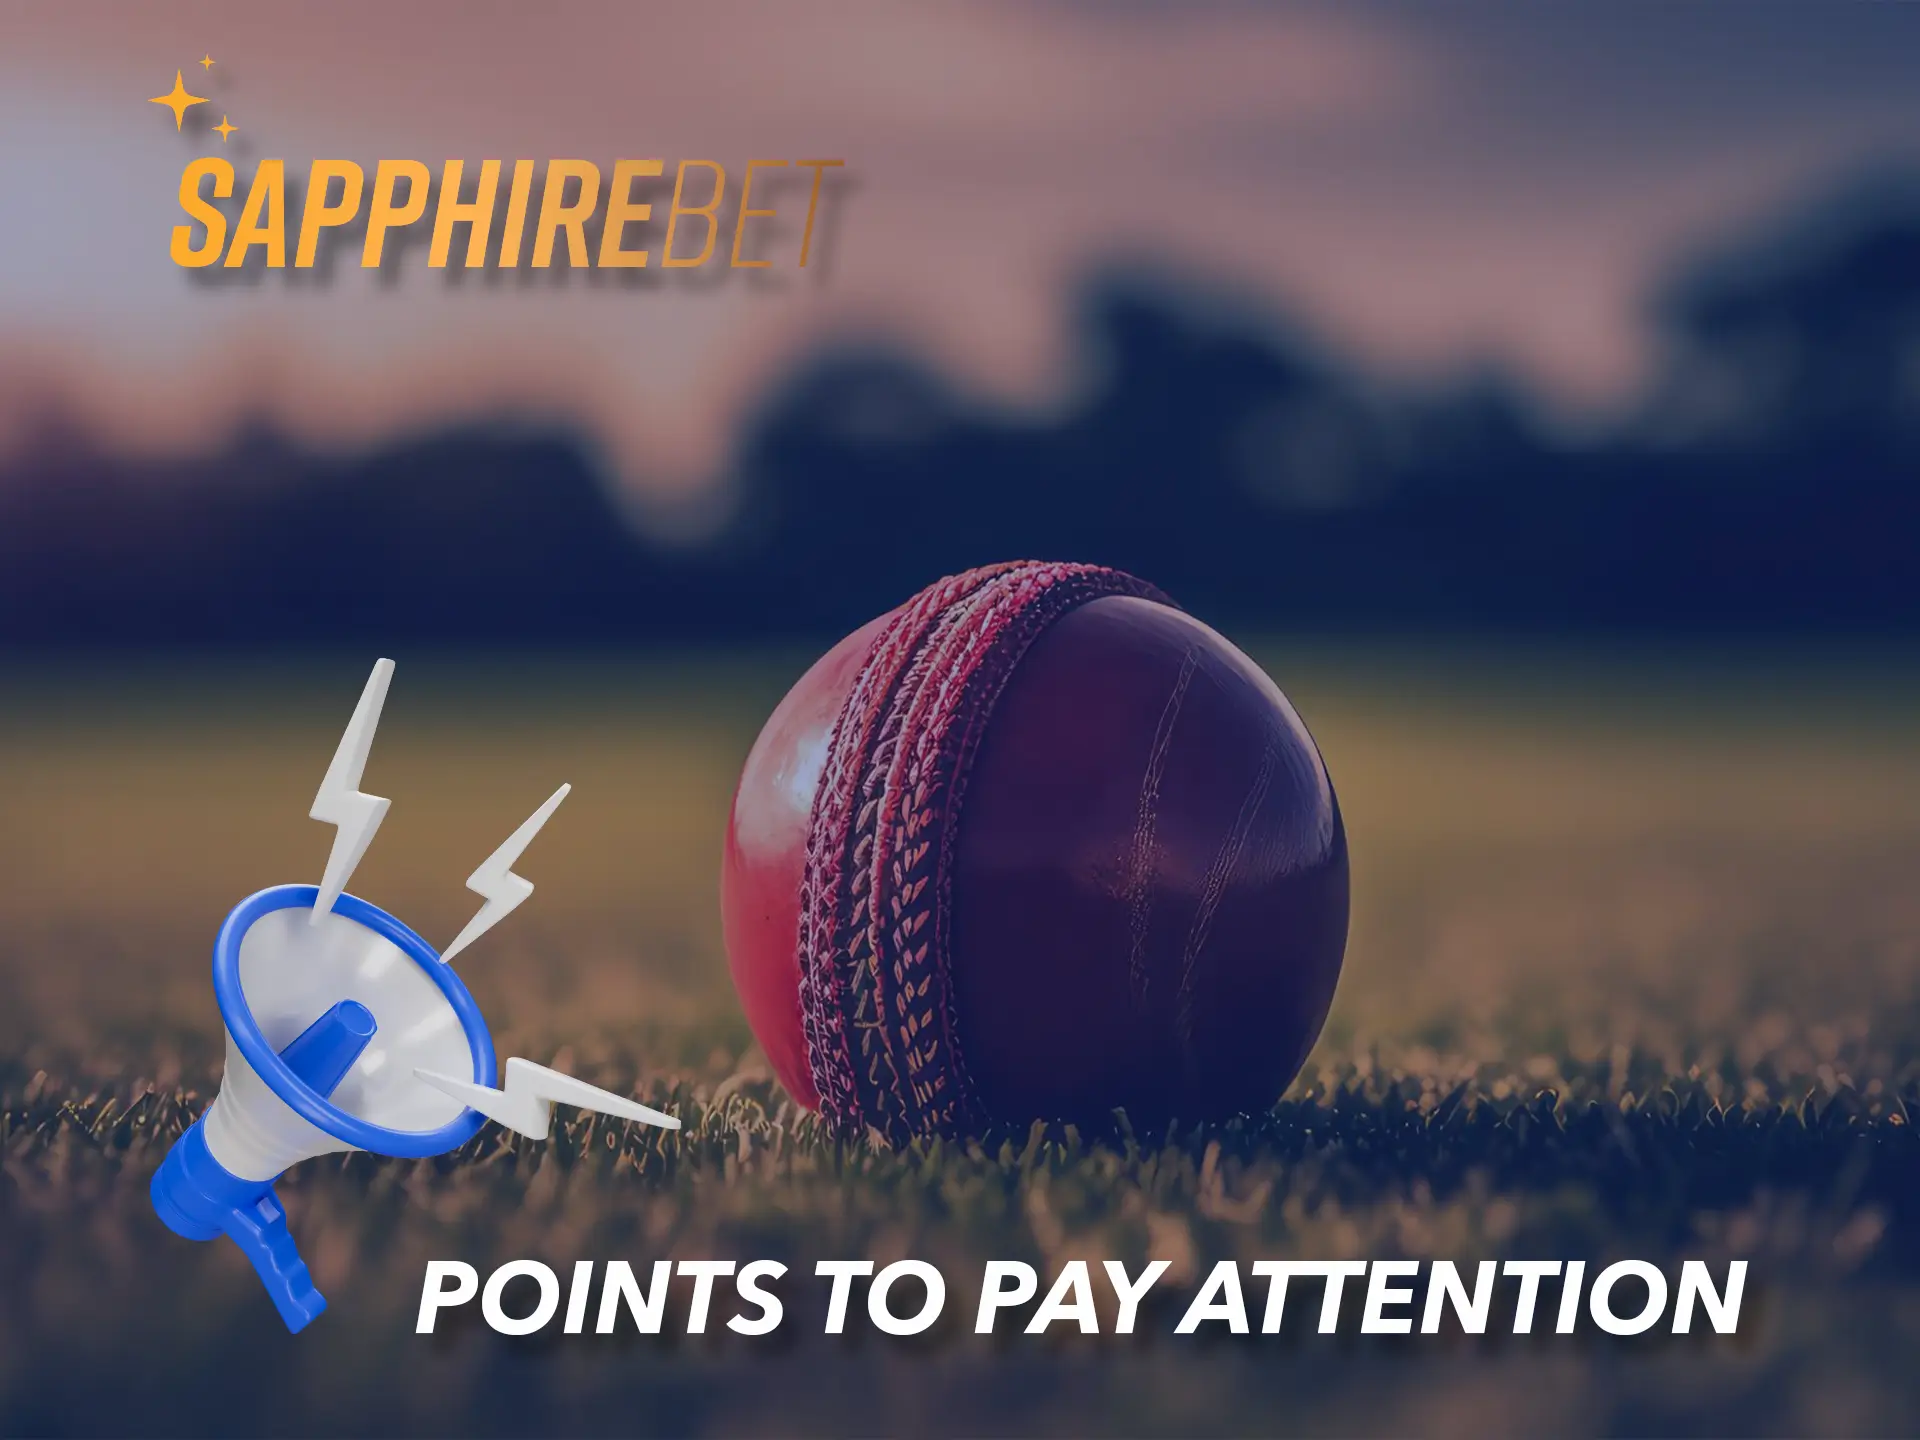 Please note the terms and conditions of Sapphirebet Casino.